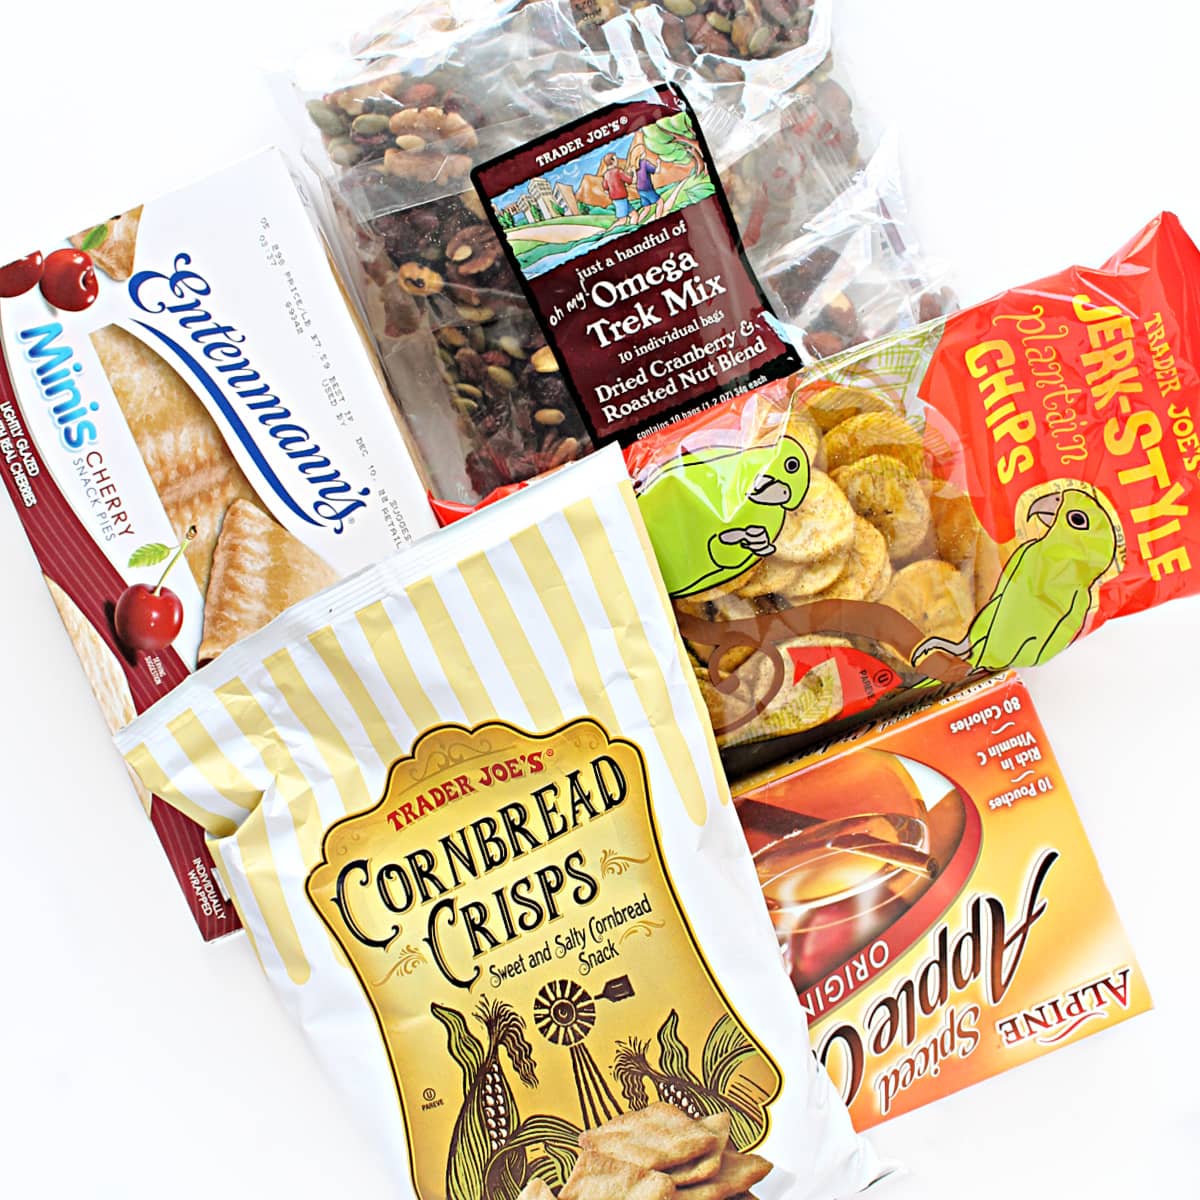 Suggested packaged snack contents: mini hand pies, trail mix, chips, apple cider mix.